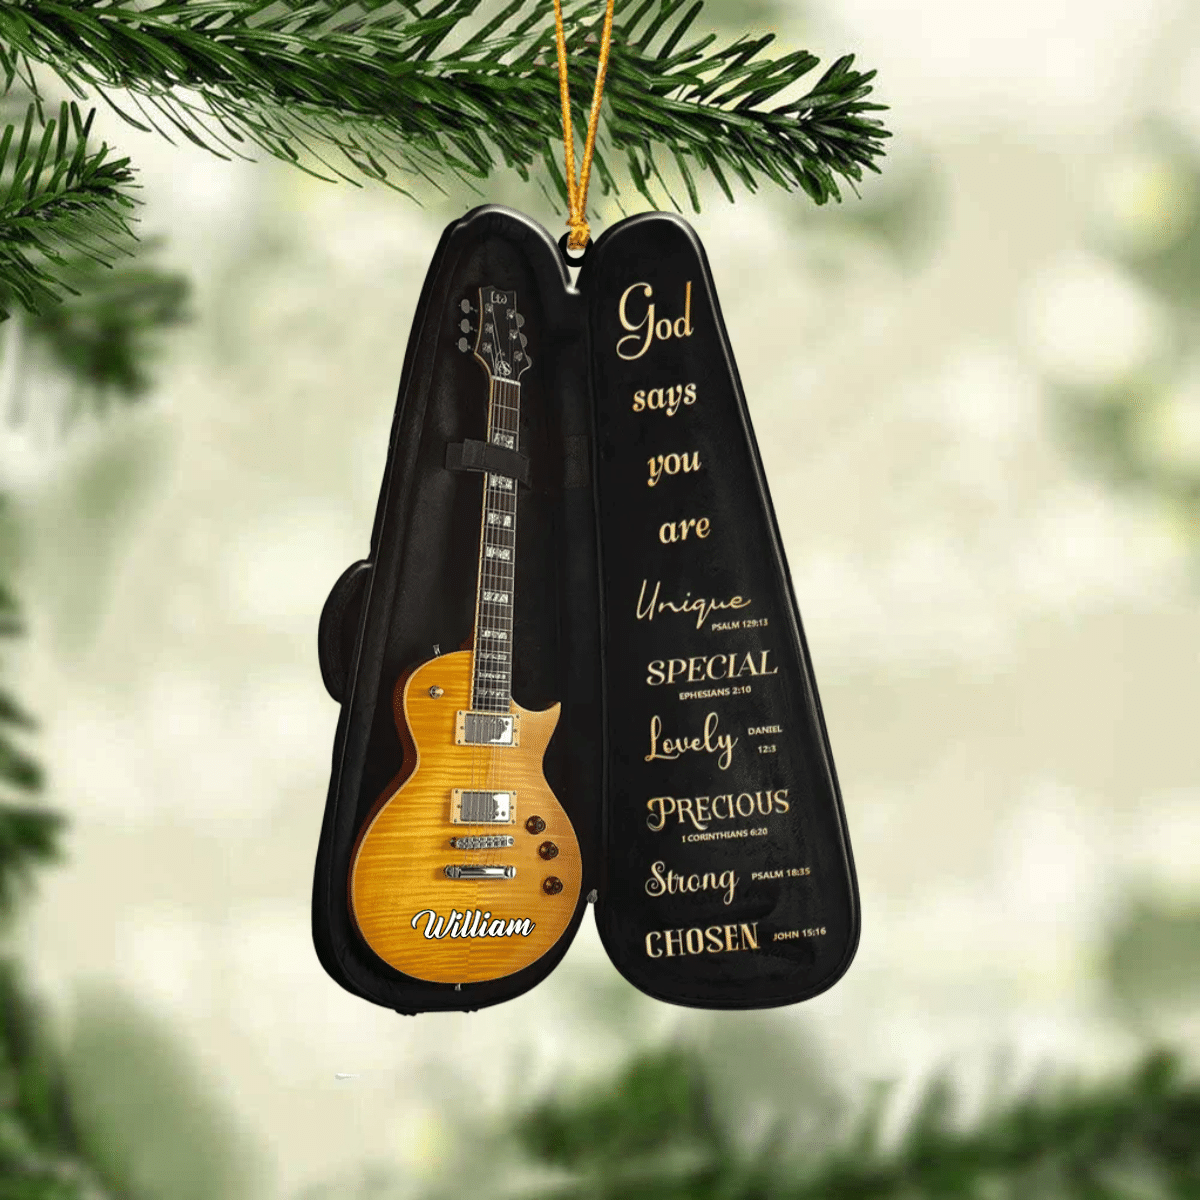 Personalized Harp Musical Instrument With Bag God Says You Are - Christmas Ornament for Music Lovers